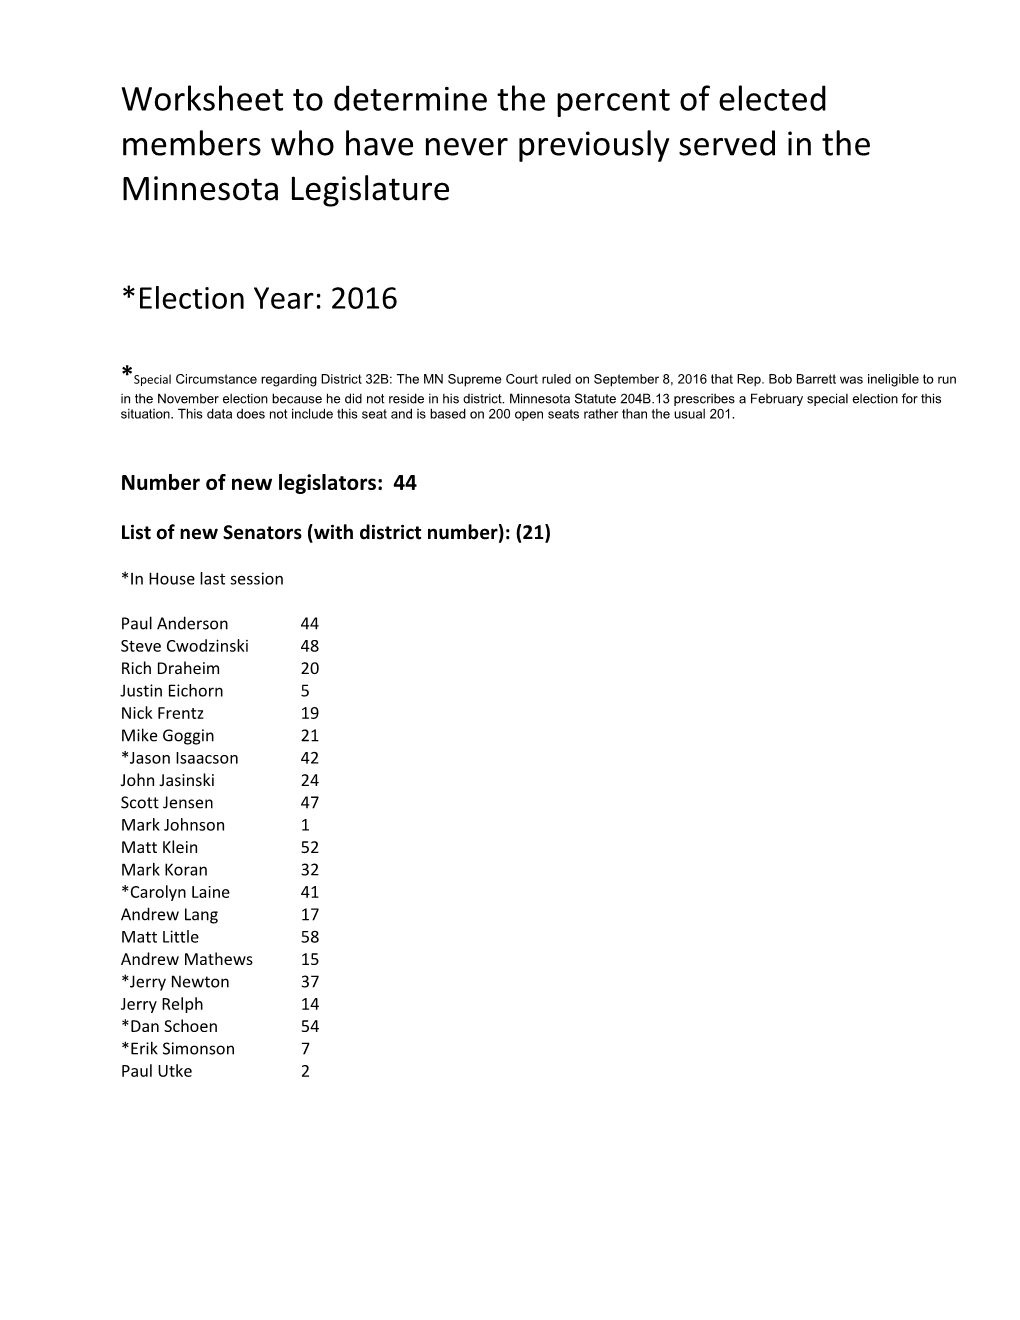 Worksheet to Determine the Percent of Elected Members Who Have Never Previously Served in the Minnesota Legislature